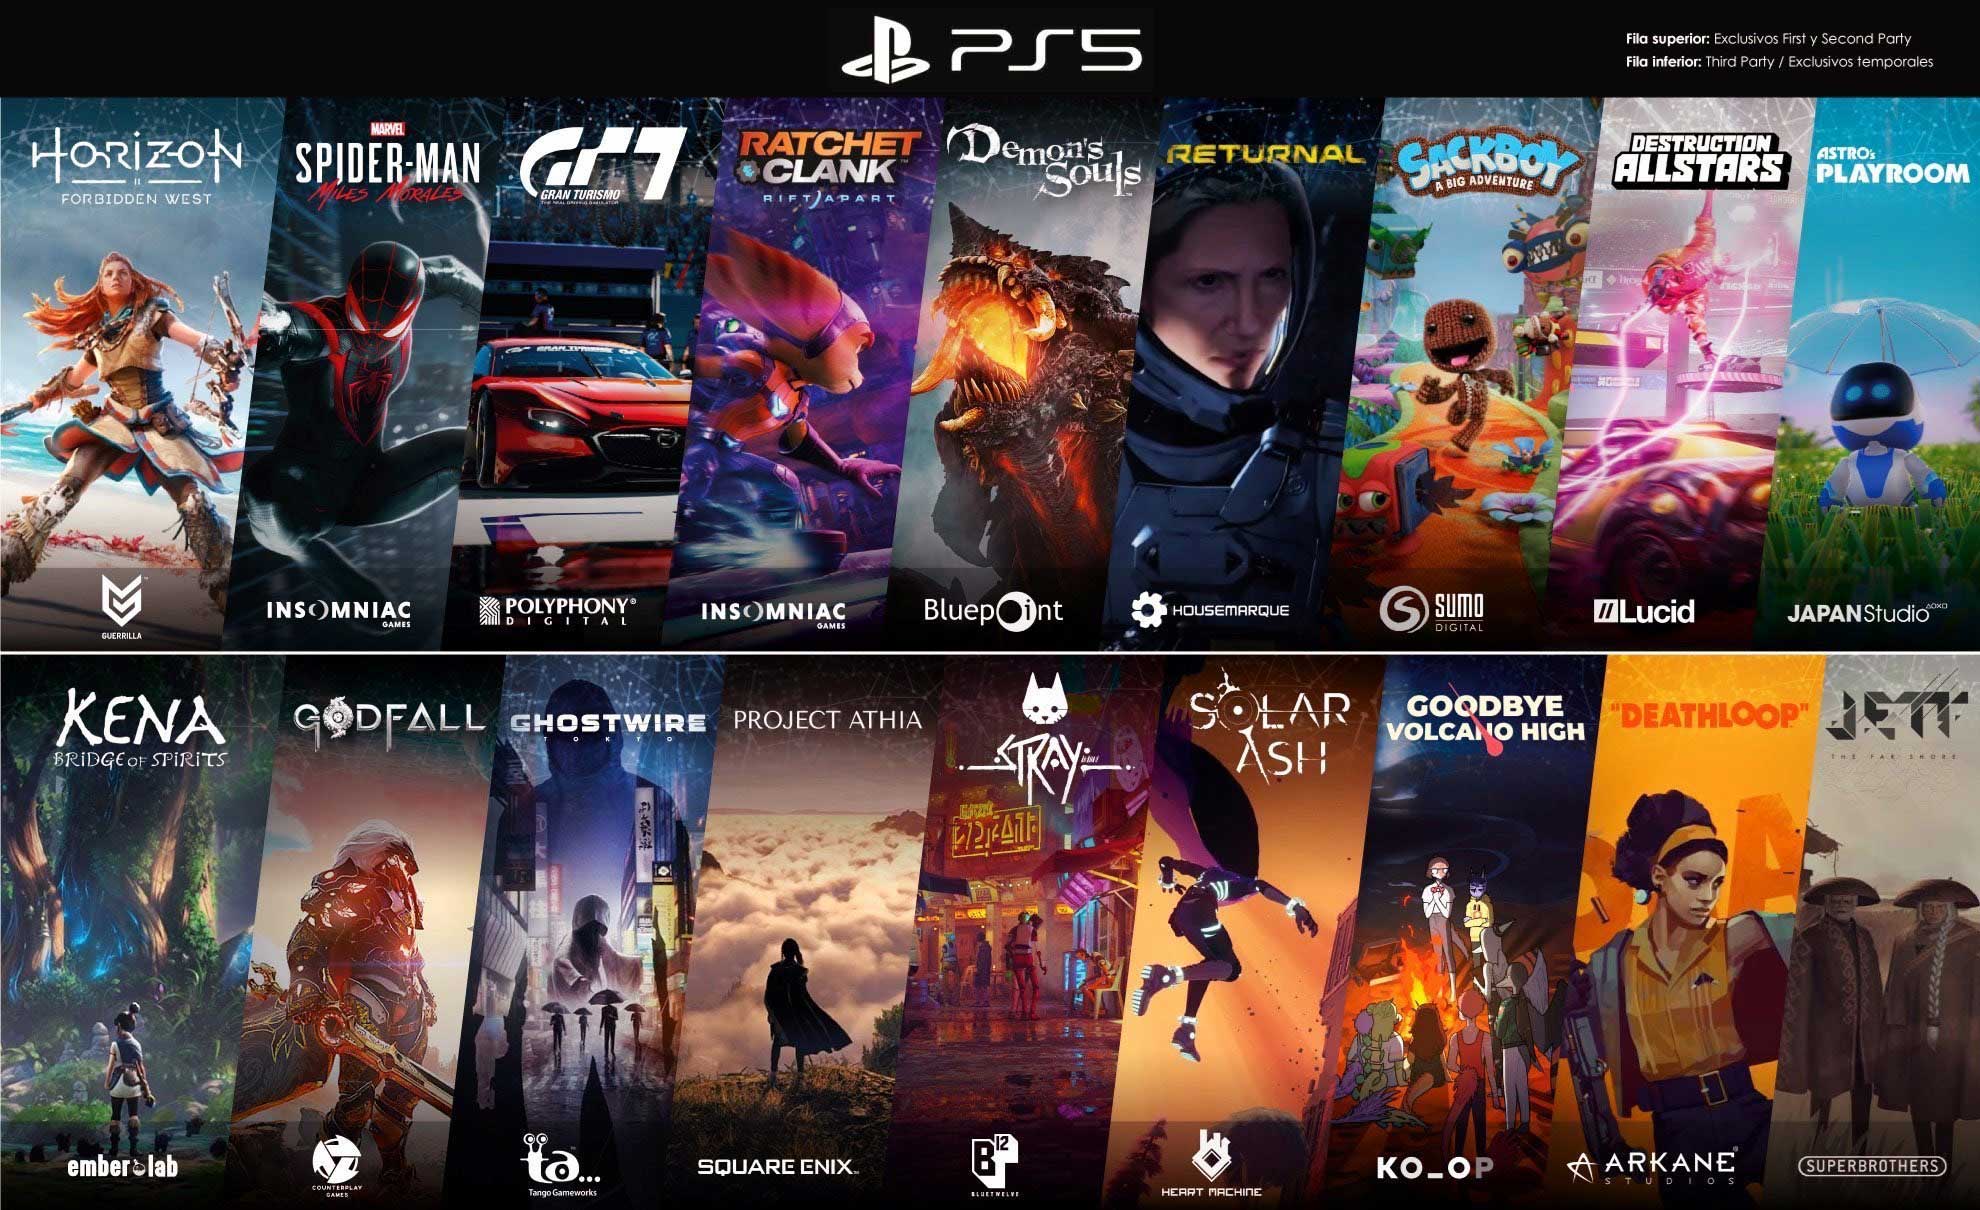 New PS5 game the release date of the upcoming PS5 game